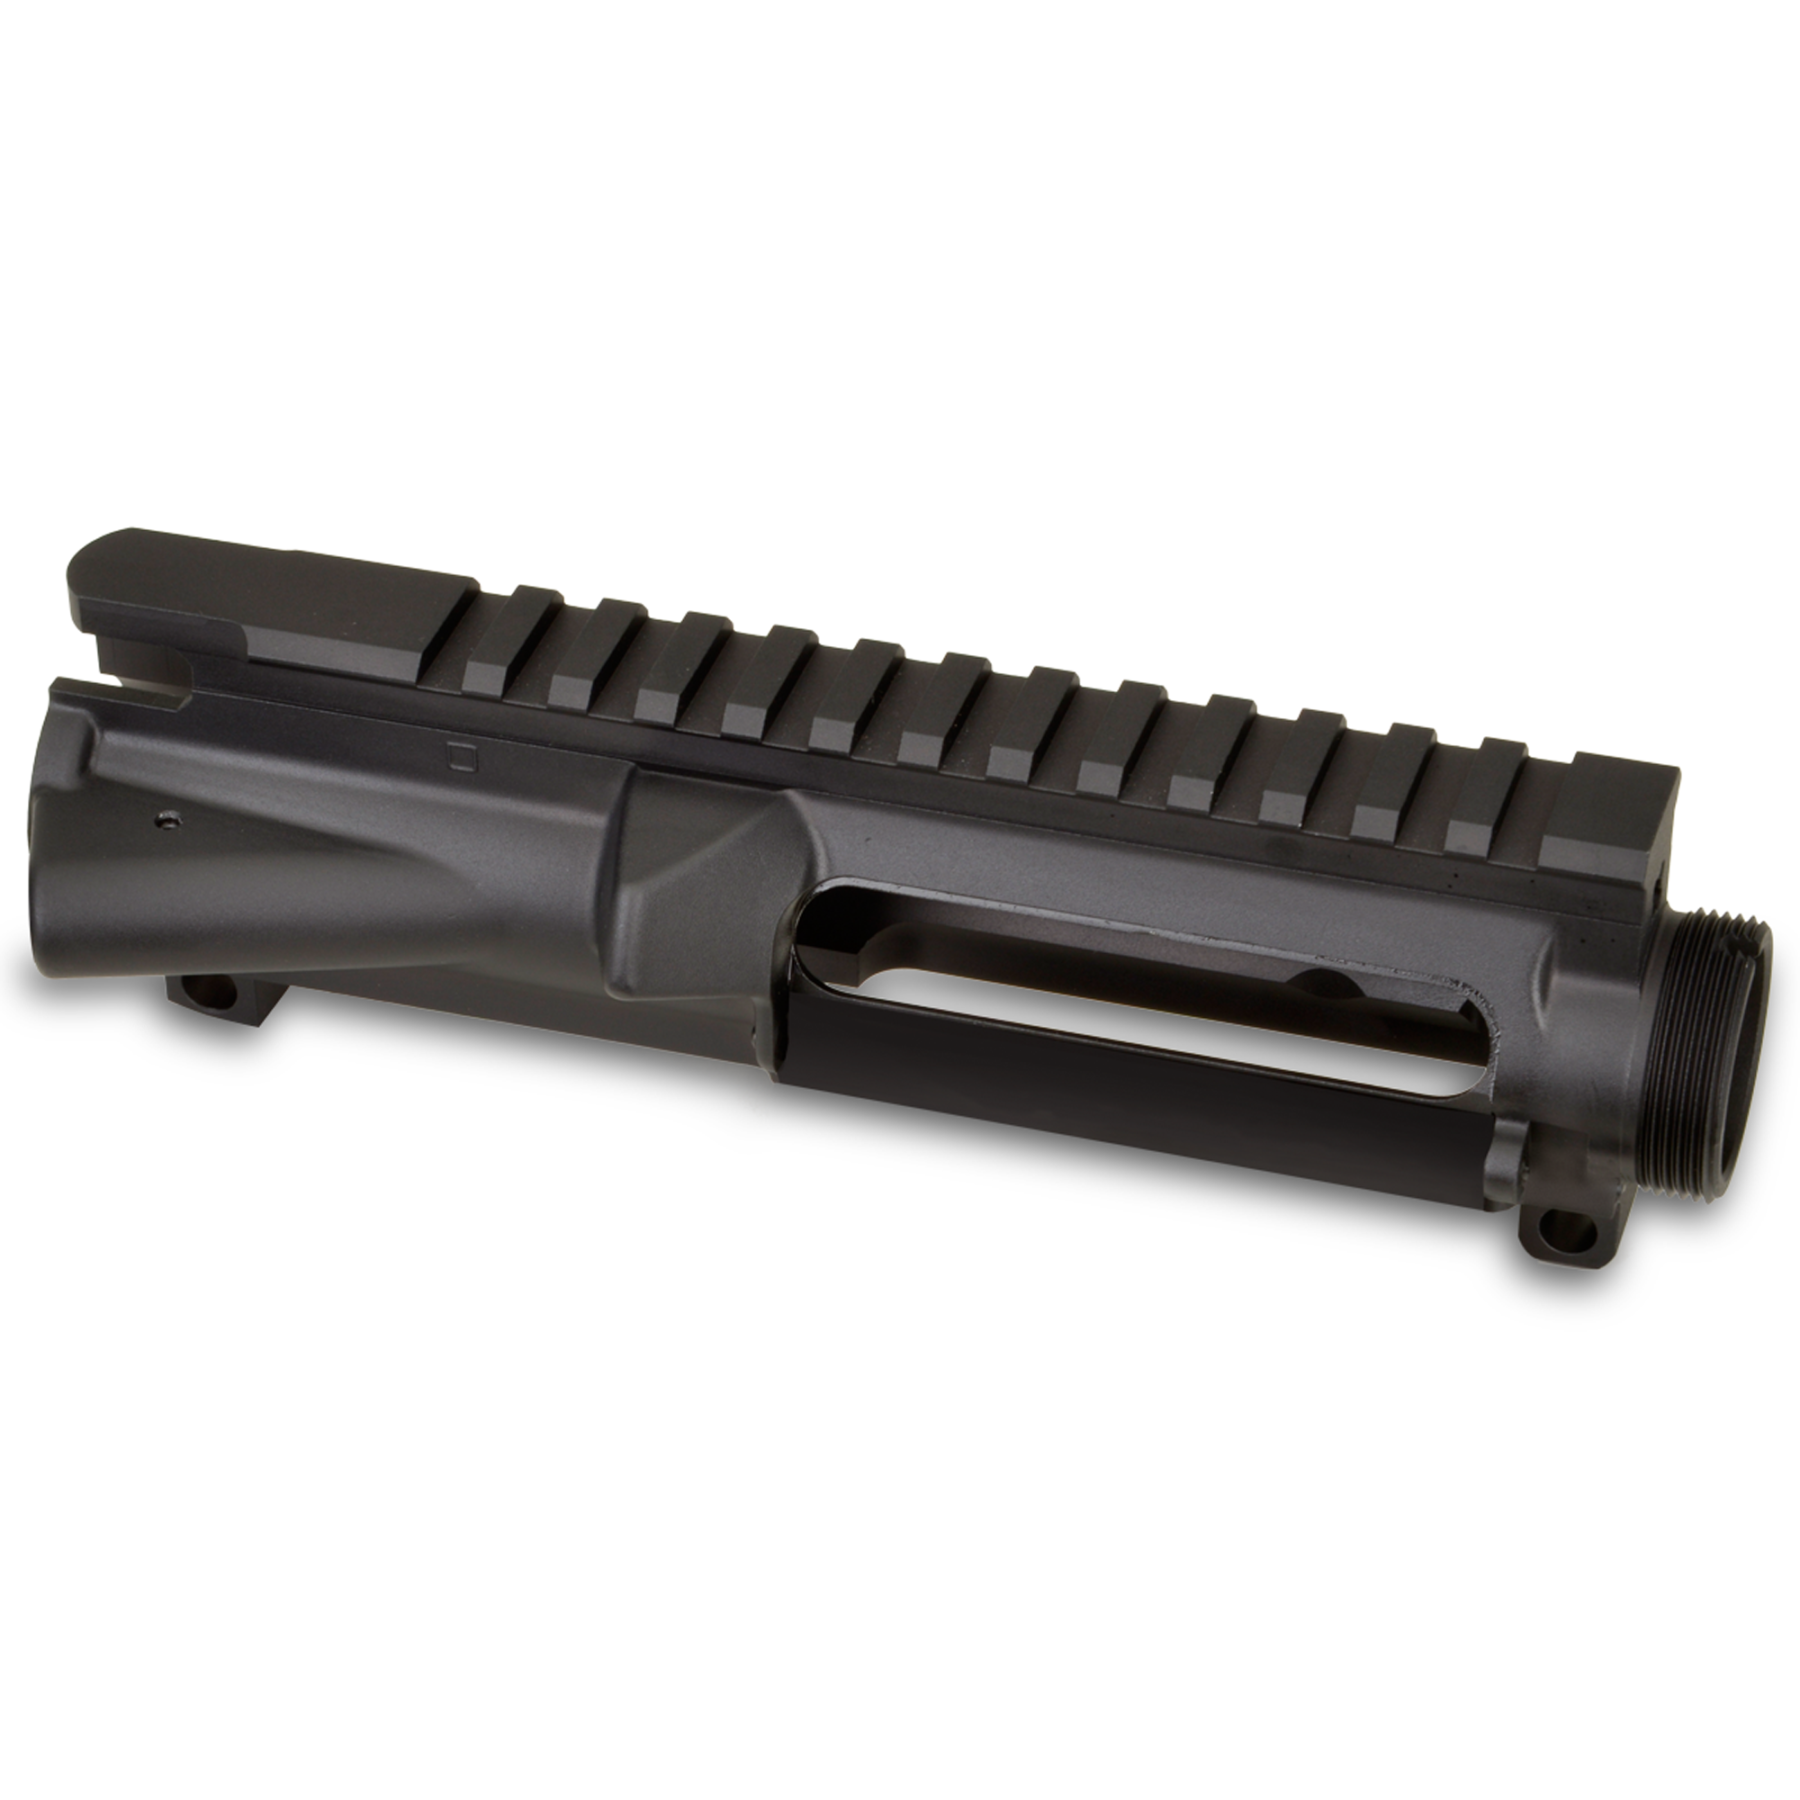 Nordic AR-15 A3 Forged Upper